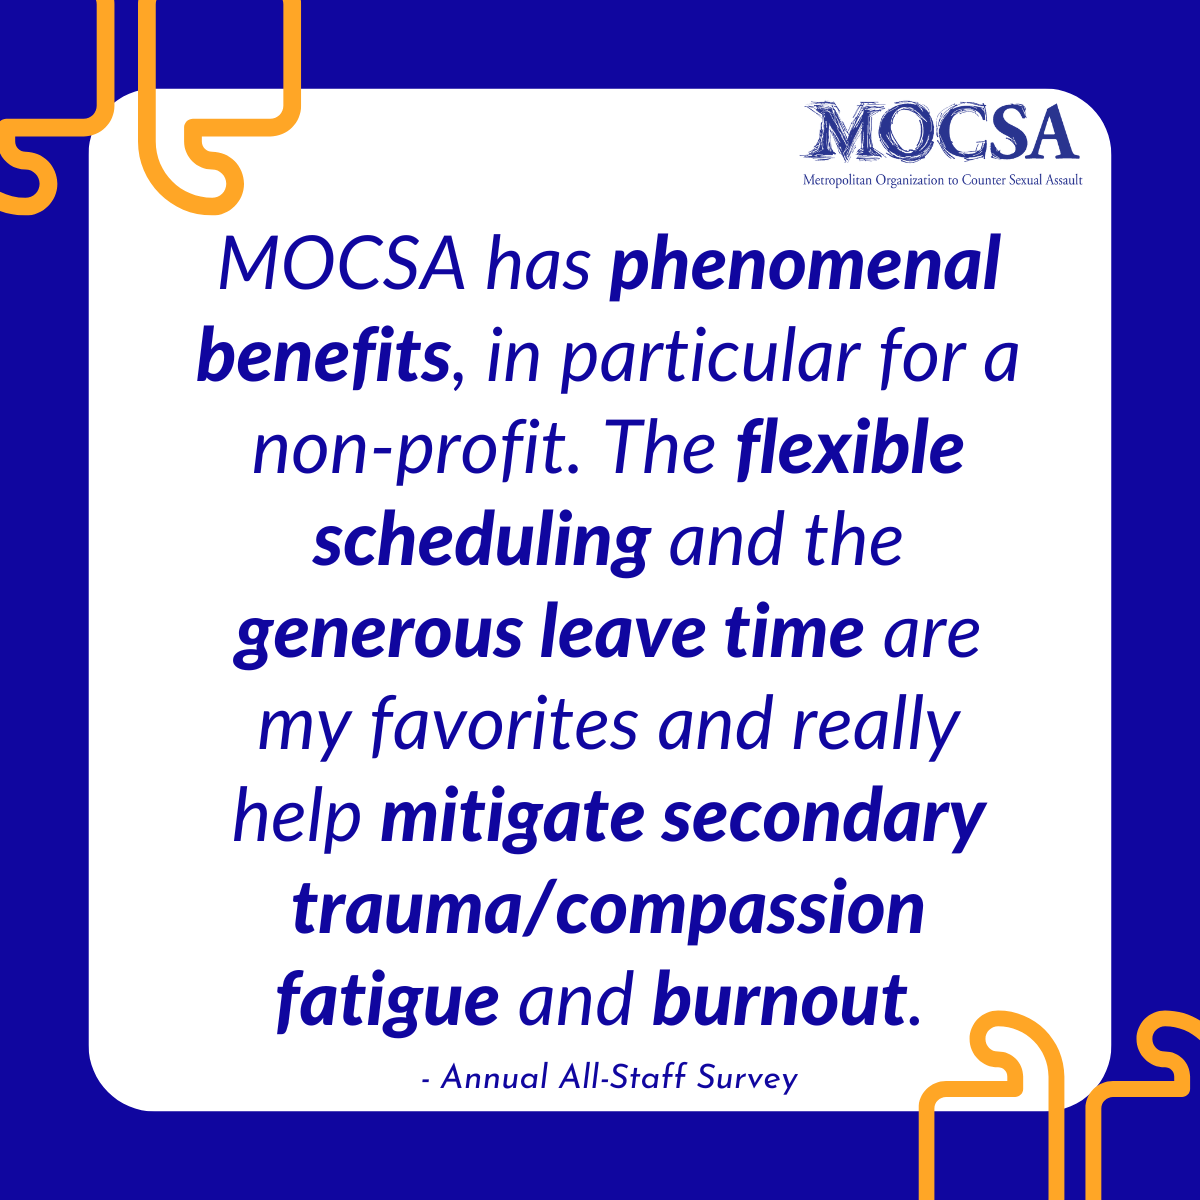 Blue text on white background that reads: MOCSA has phenomenal benefits, in particular for a non-profit. The flexible scheduling and the generous leave time are my favorites and really help mitigate secondary trauma/compassion fatigue and burnout.